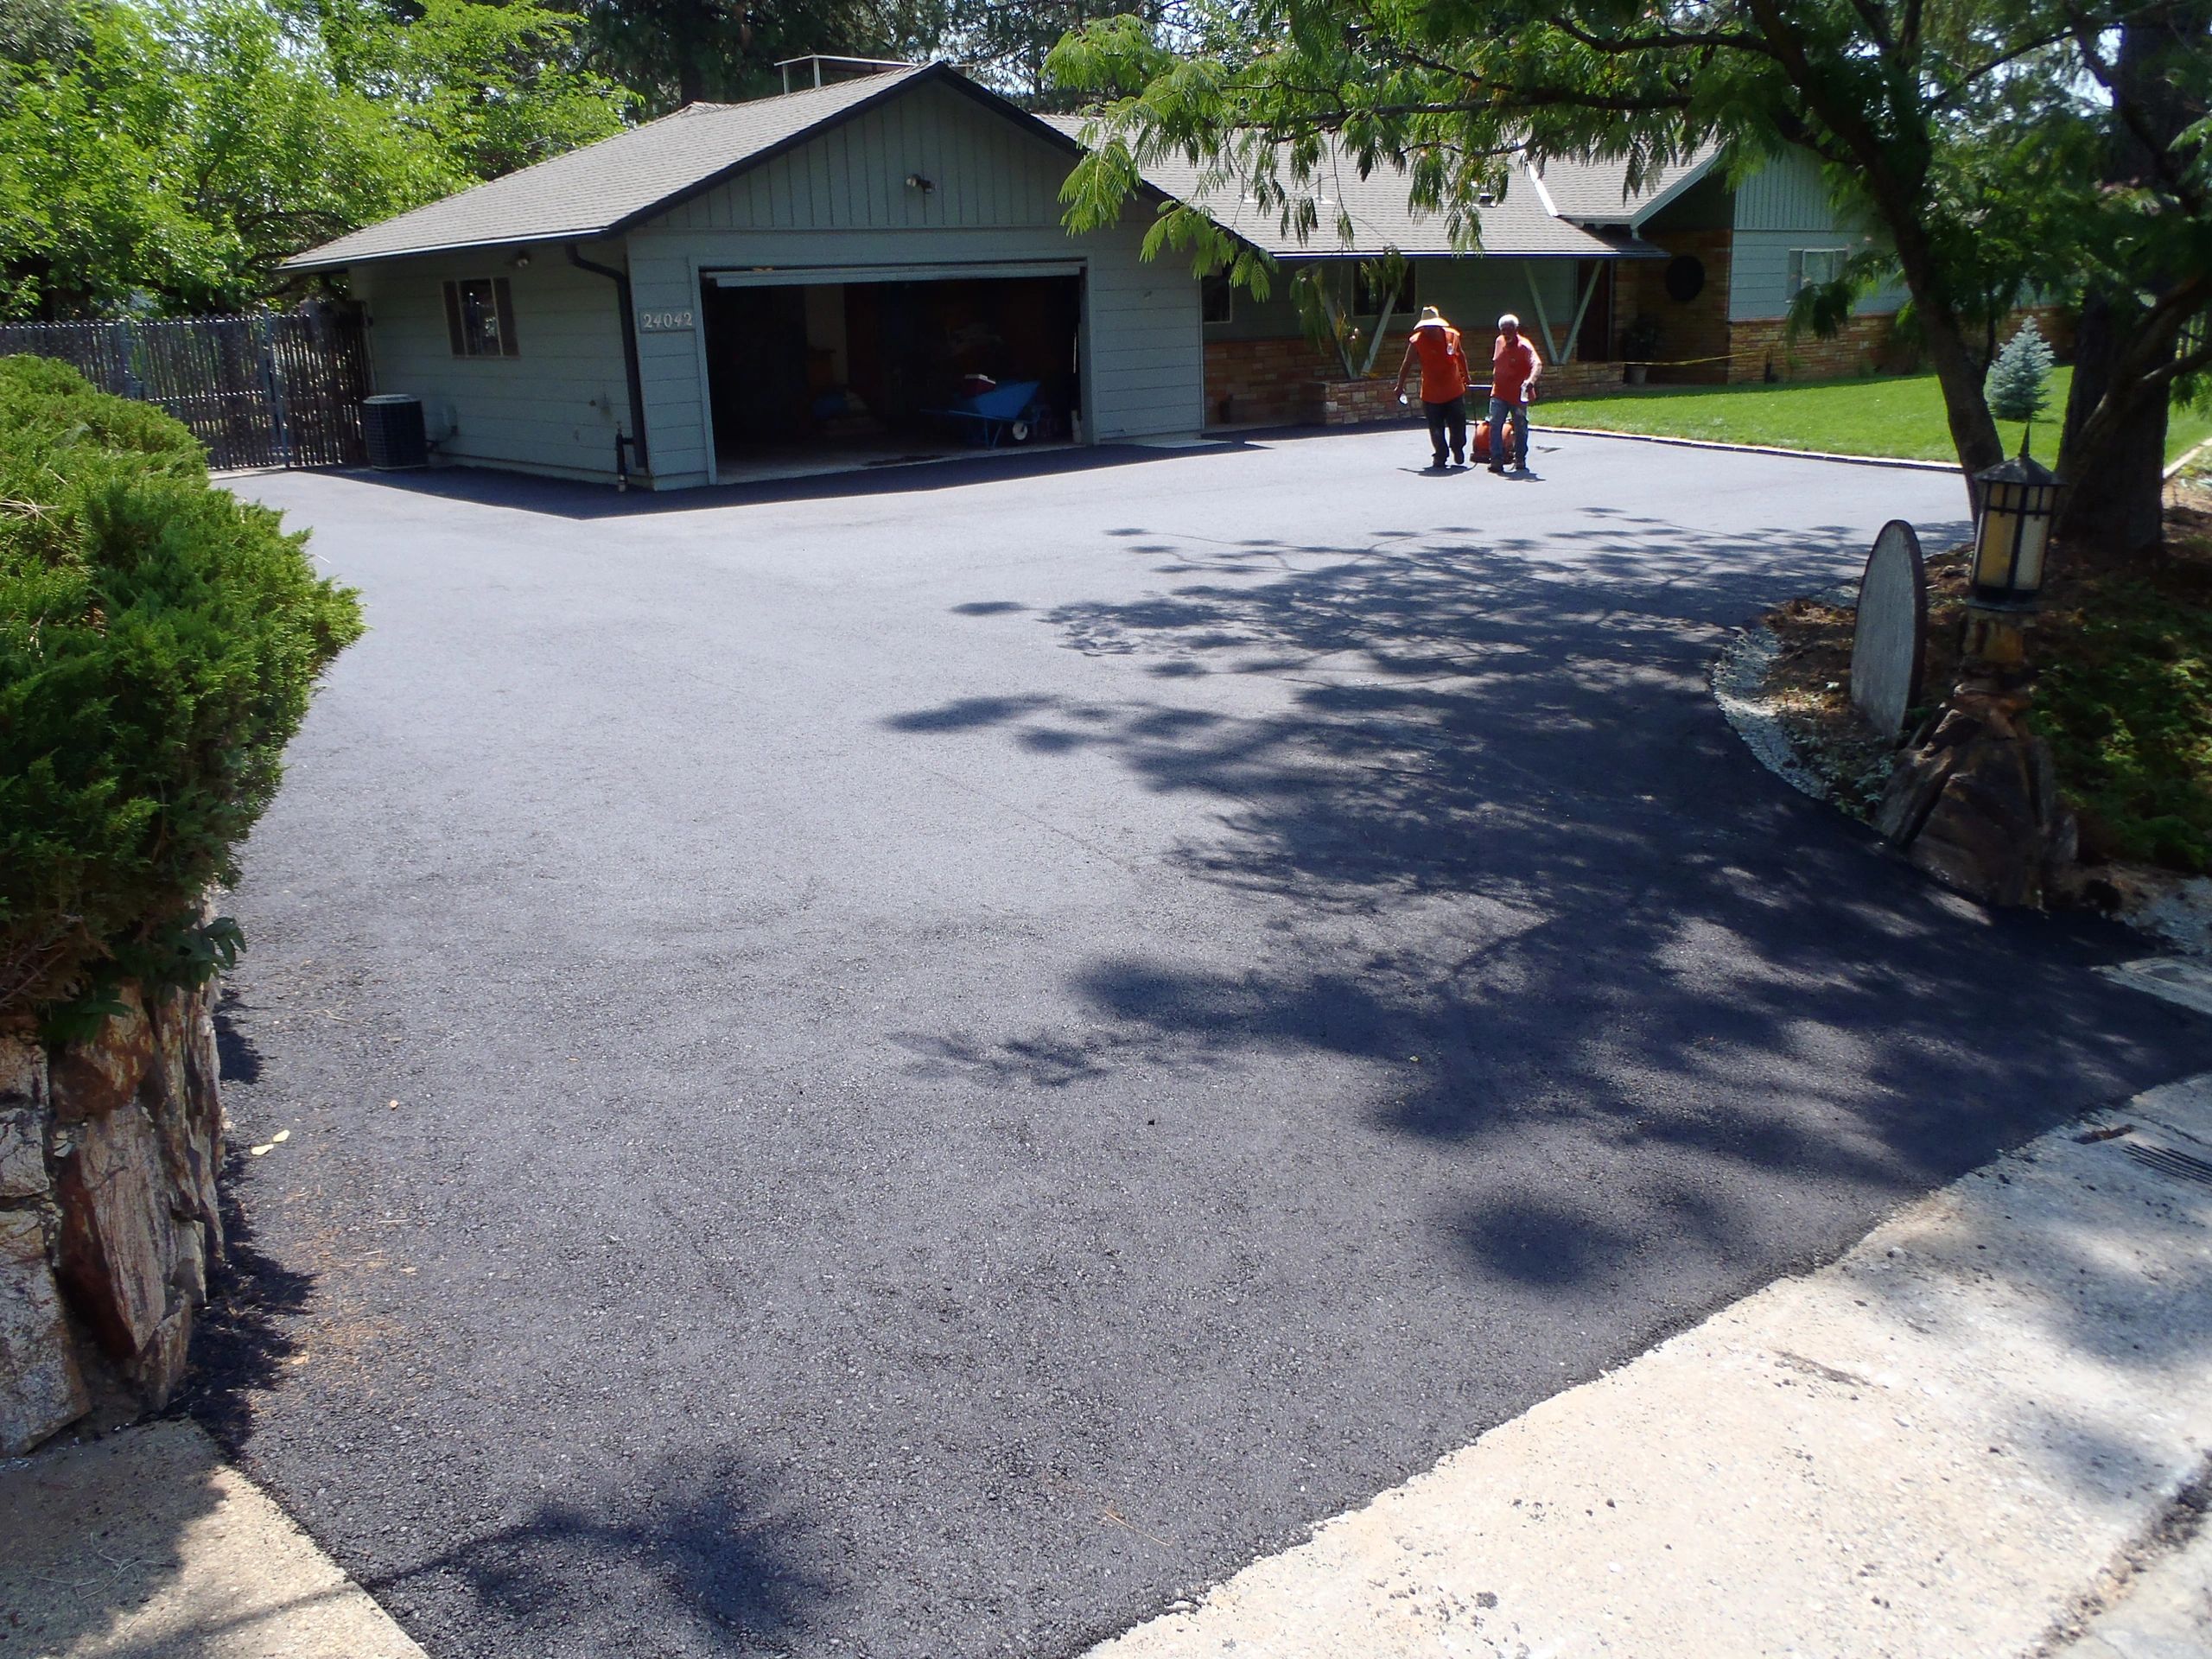 Newly paved asphalt driveway with two crew members and house in the distance